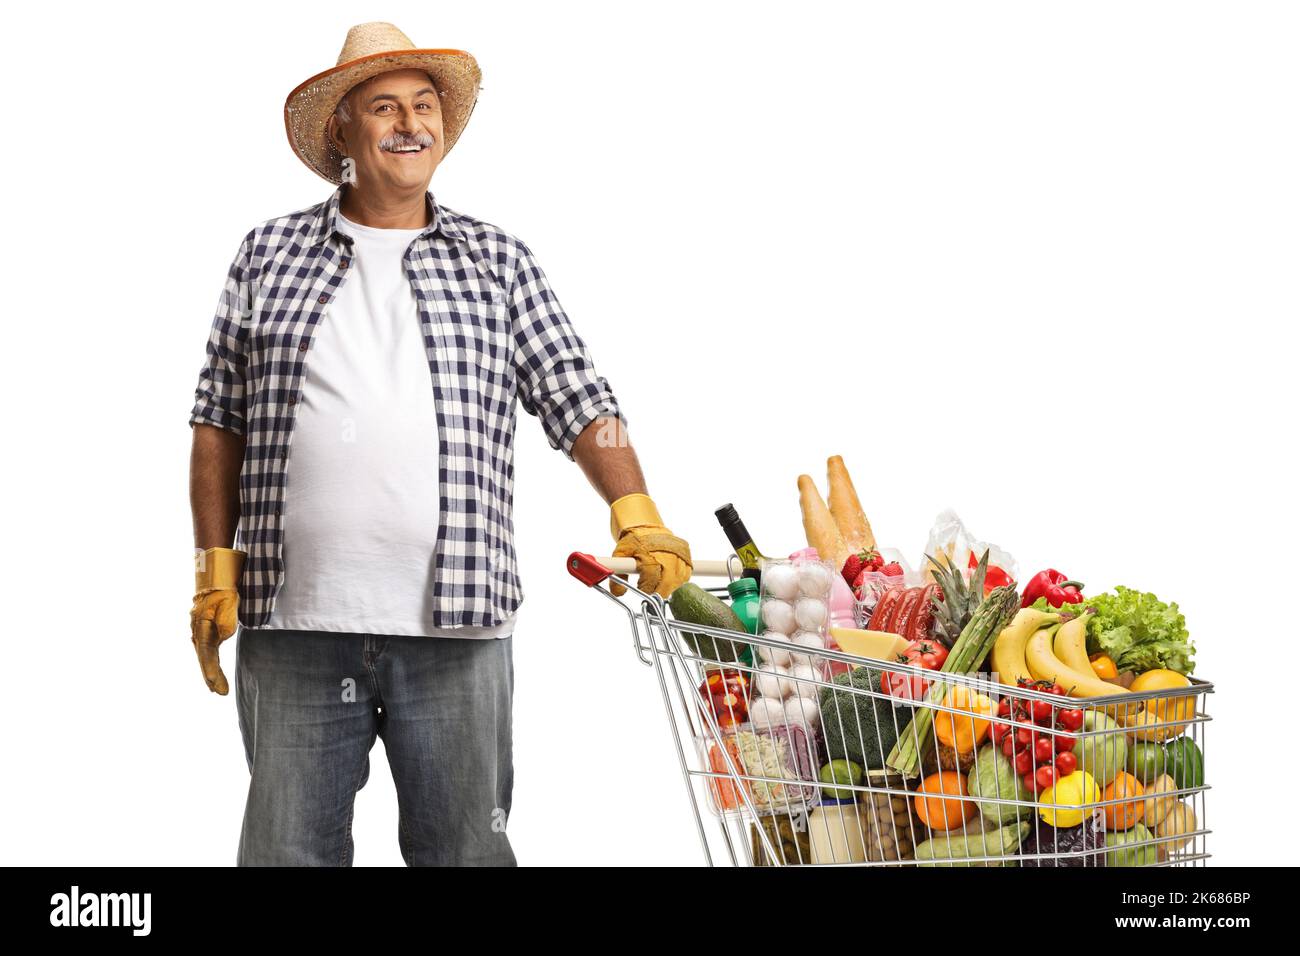 Mature farmer posing with a shopping cart full of food products isolated on white background Stock Photo